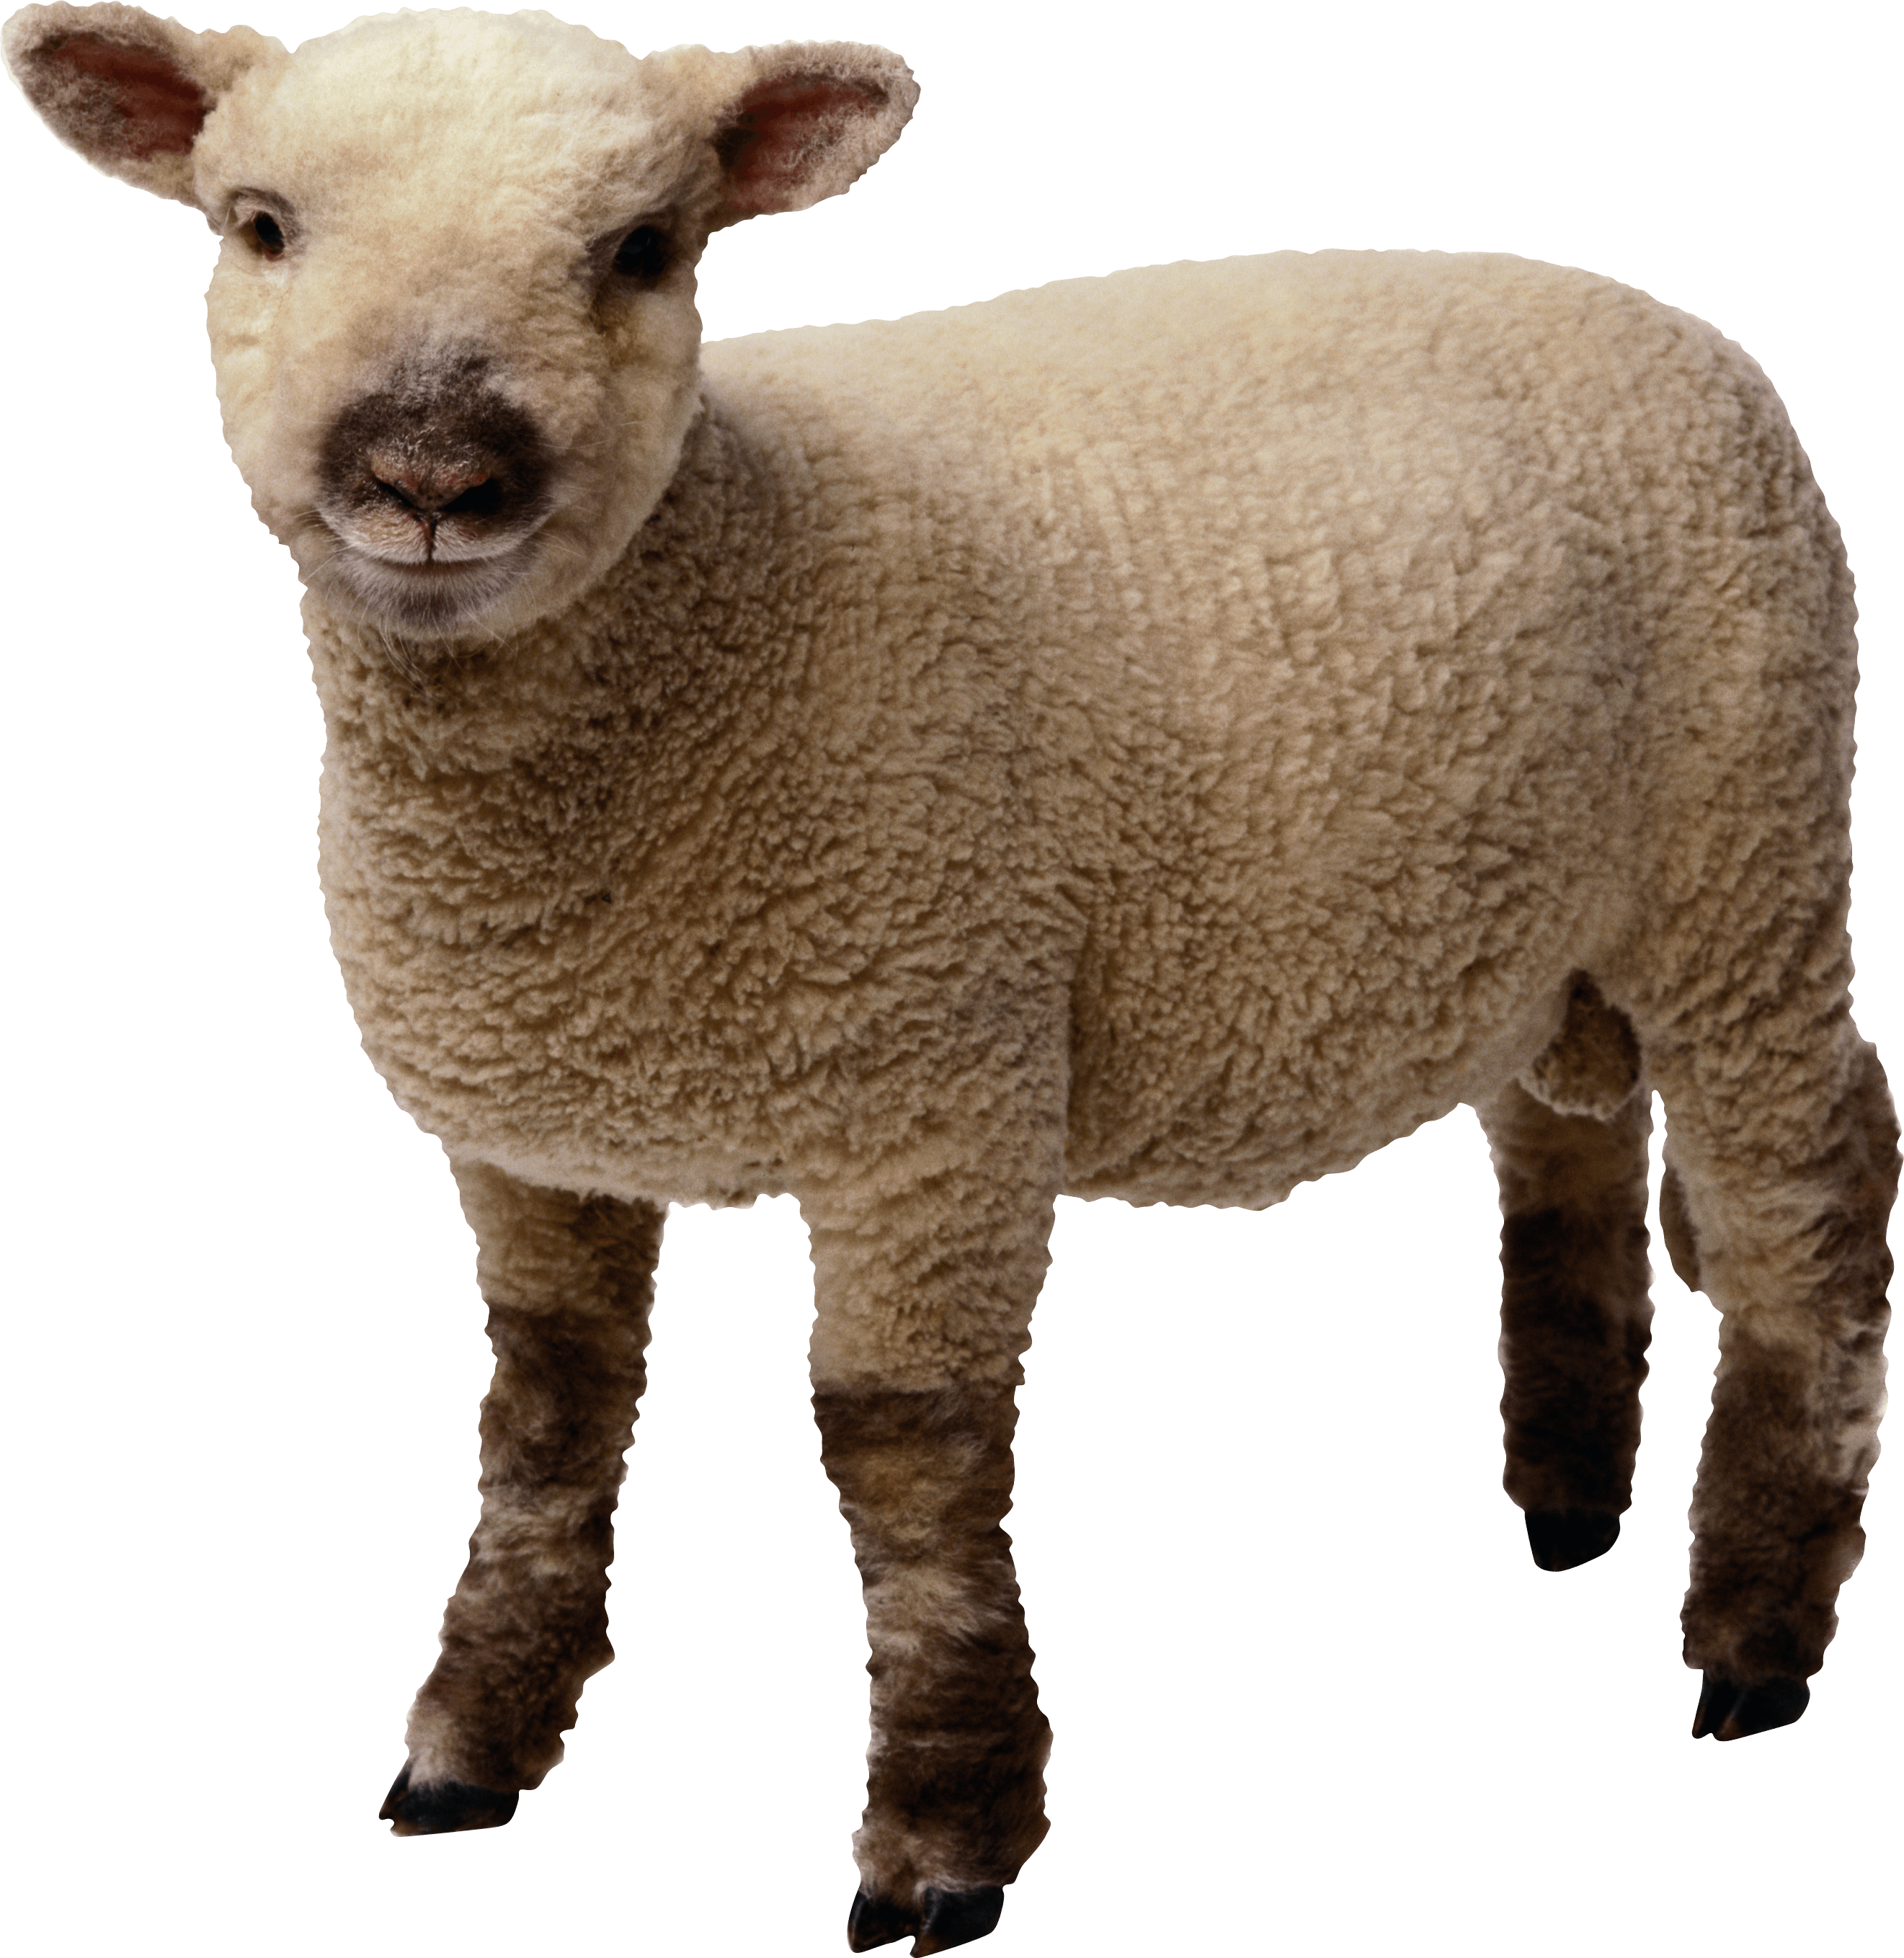 Little Sheep Png Image PNG Image